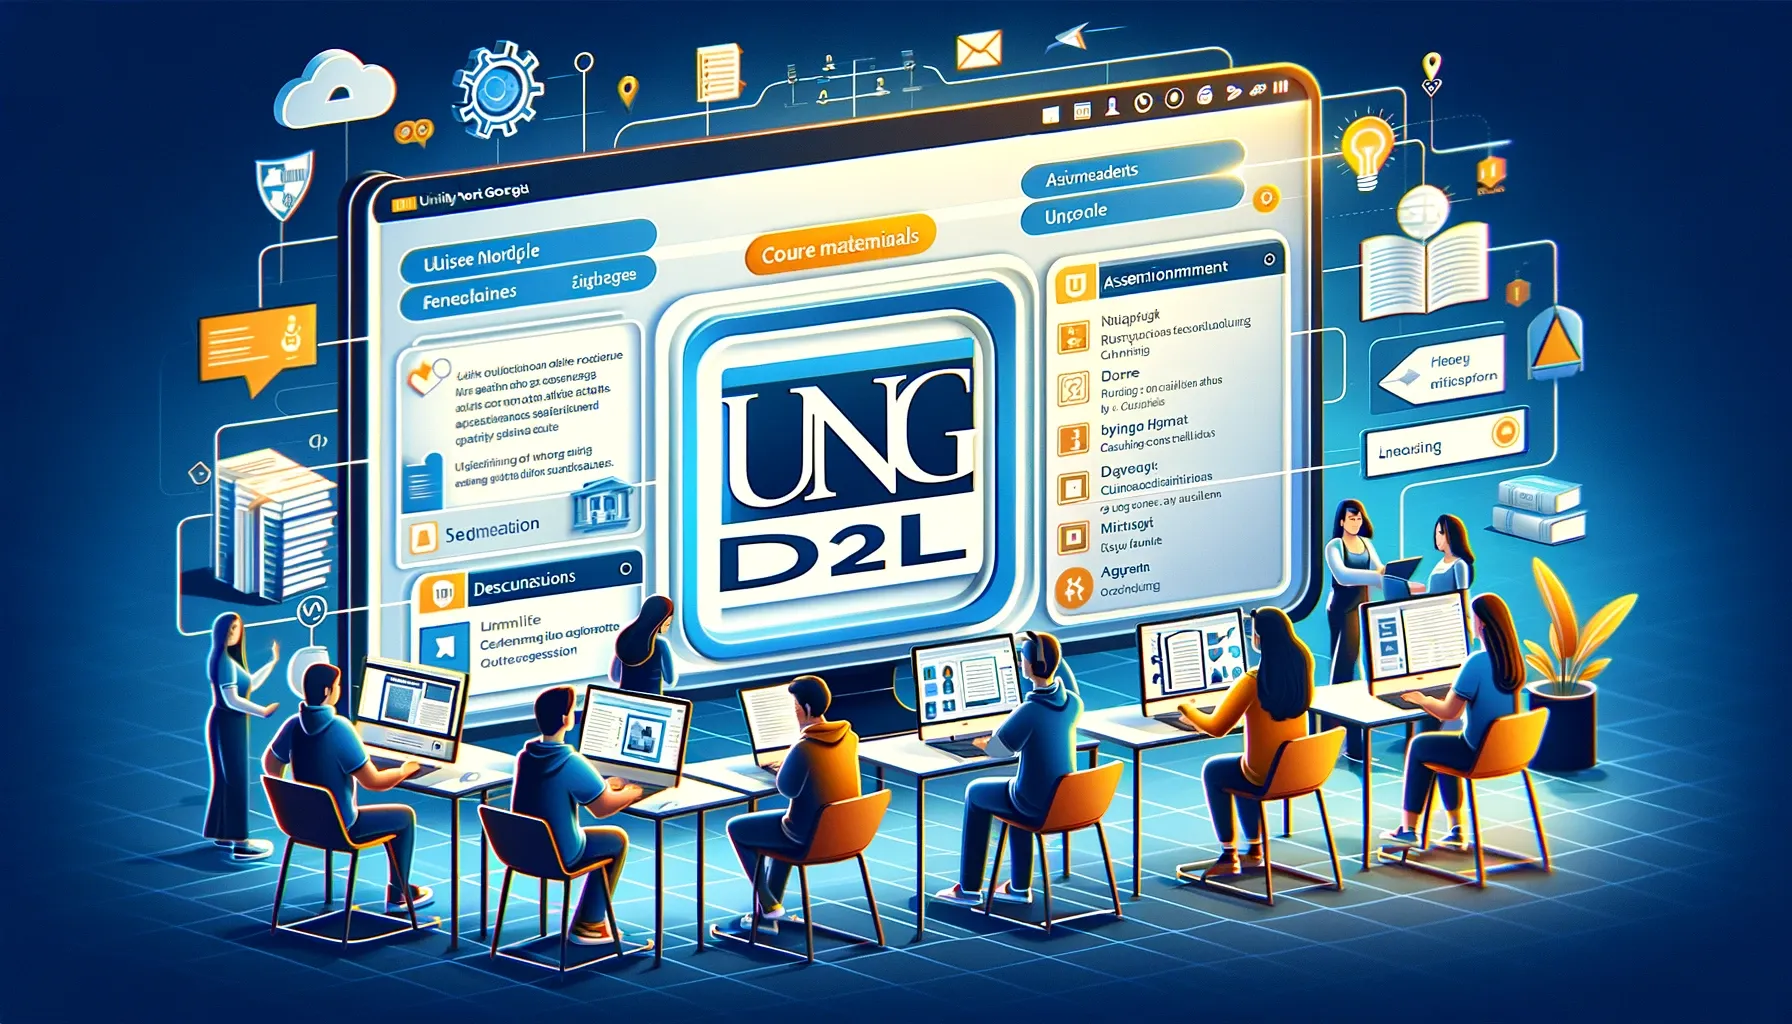 UNG D2L Login: How to Access Your Online Courses